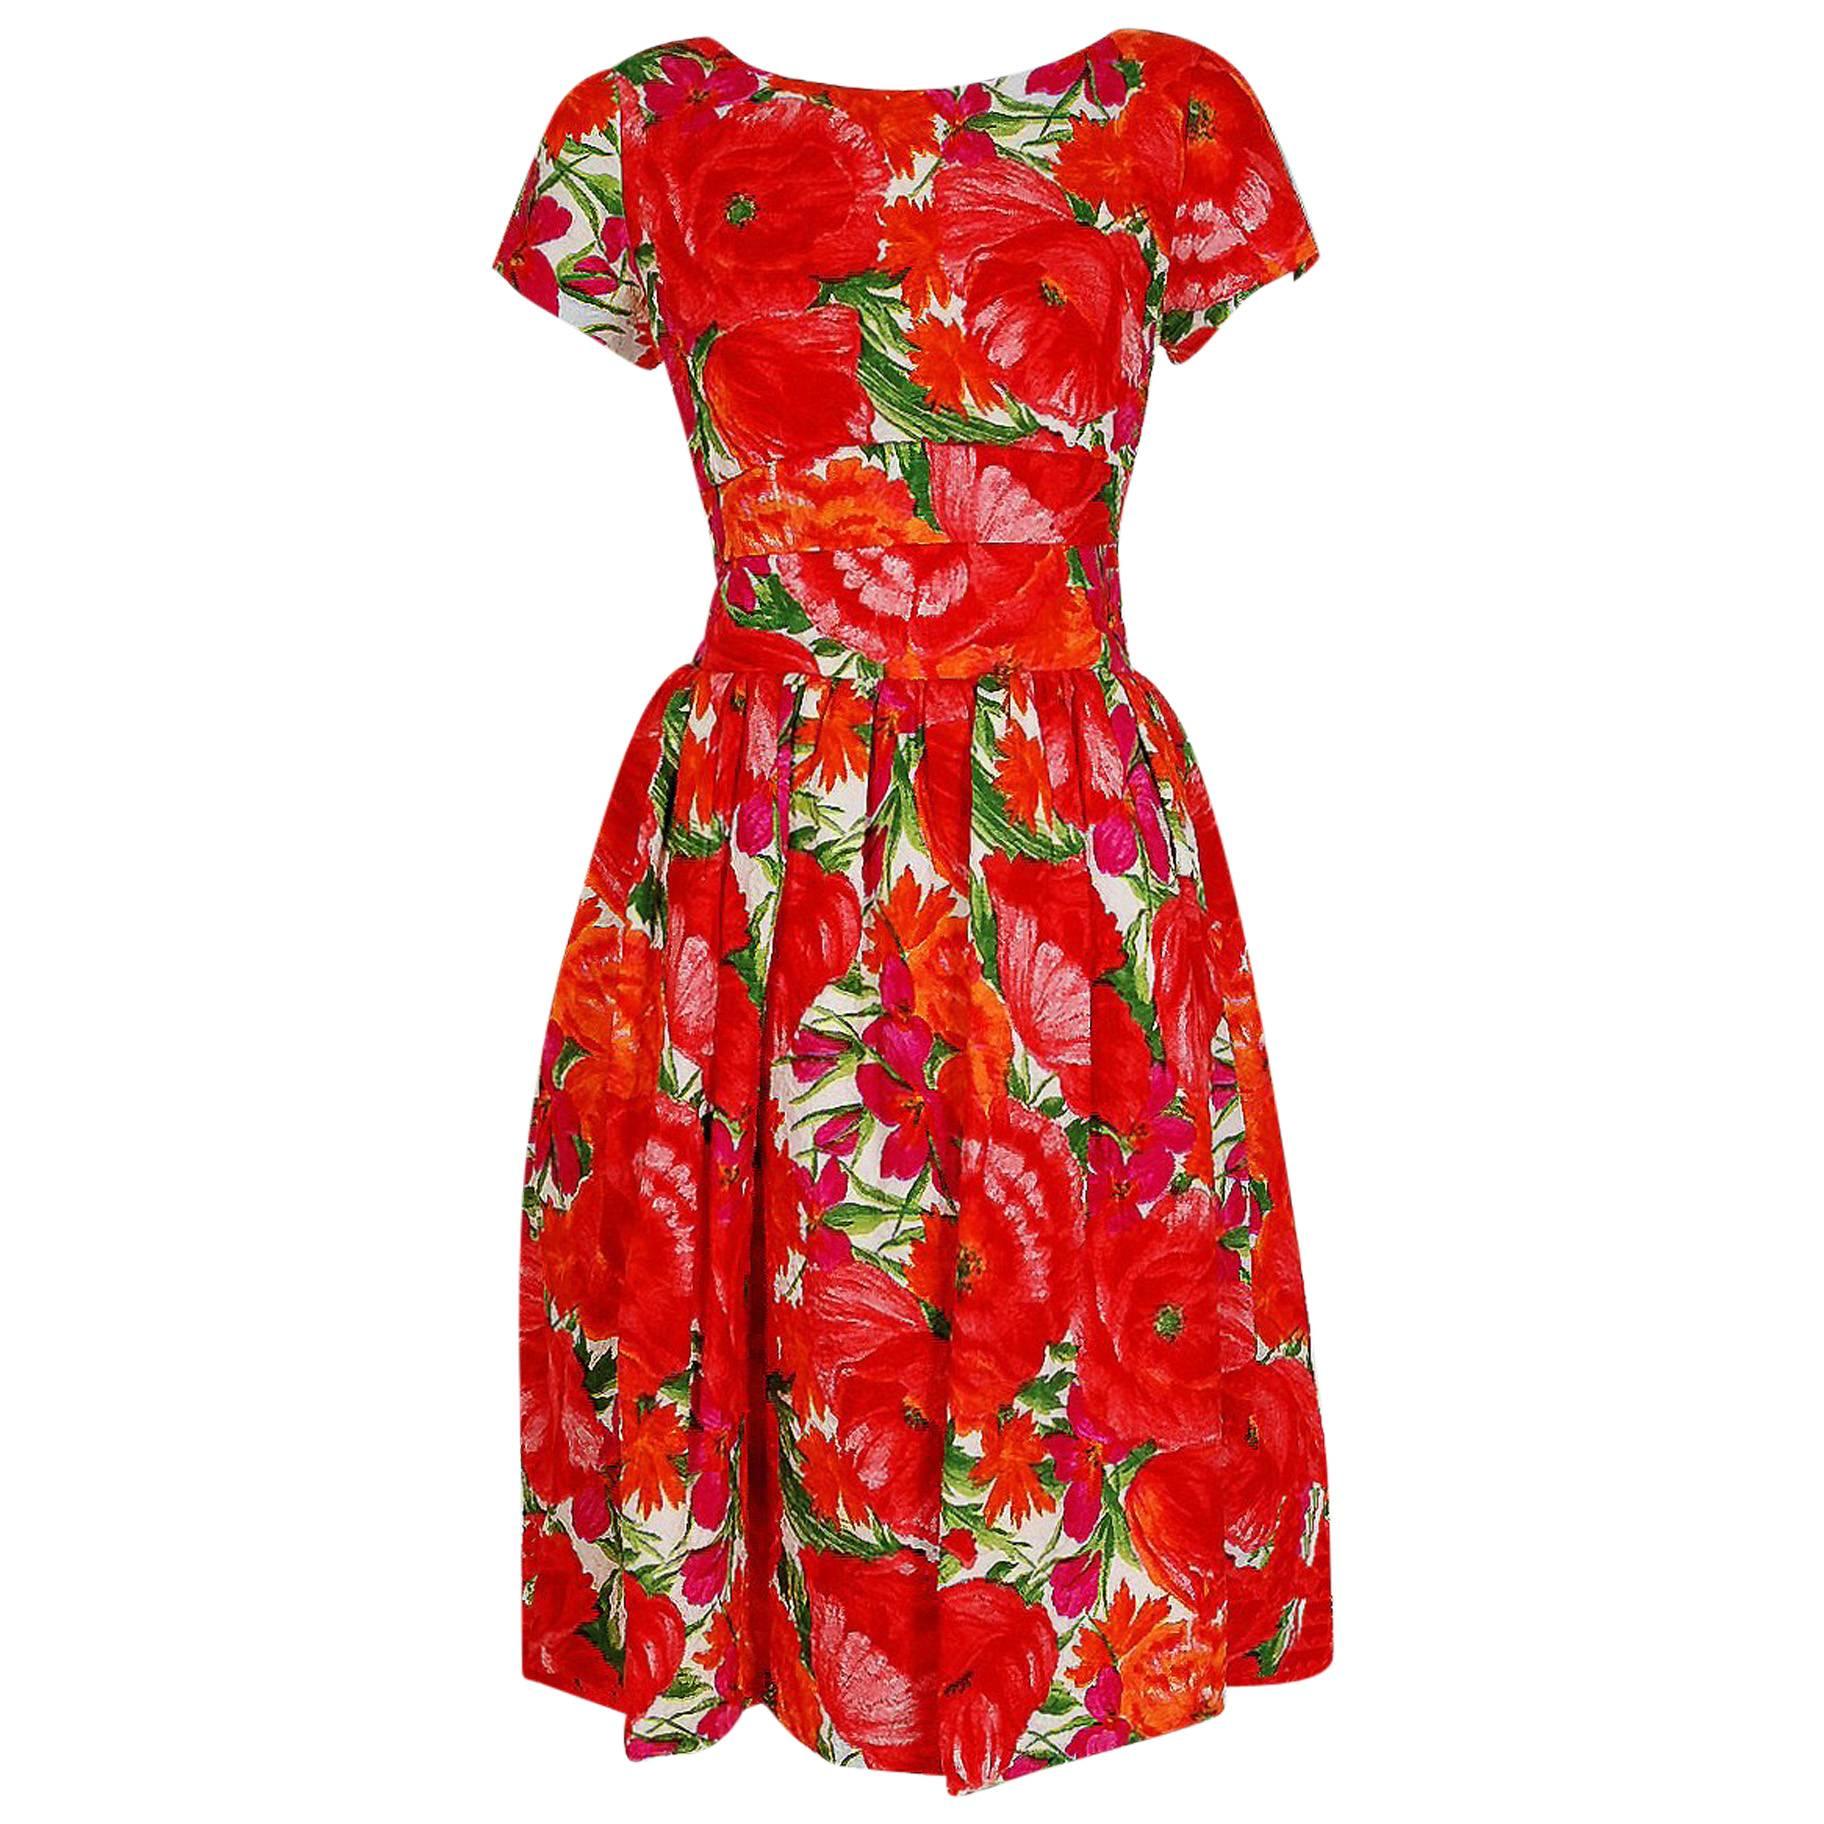 1958 Christian Dior New York Red-Roses Floral Garden Silk Back-Bow Party Dress